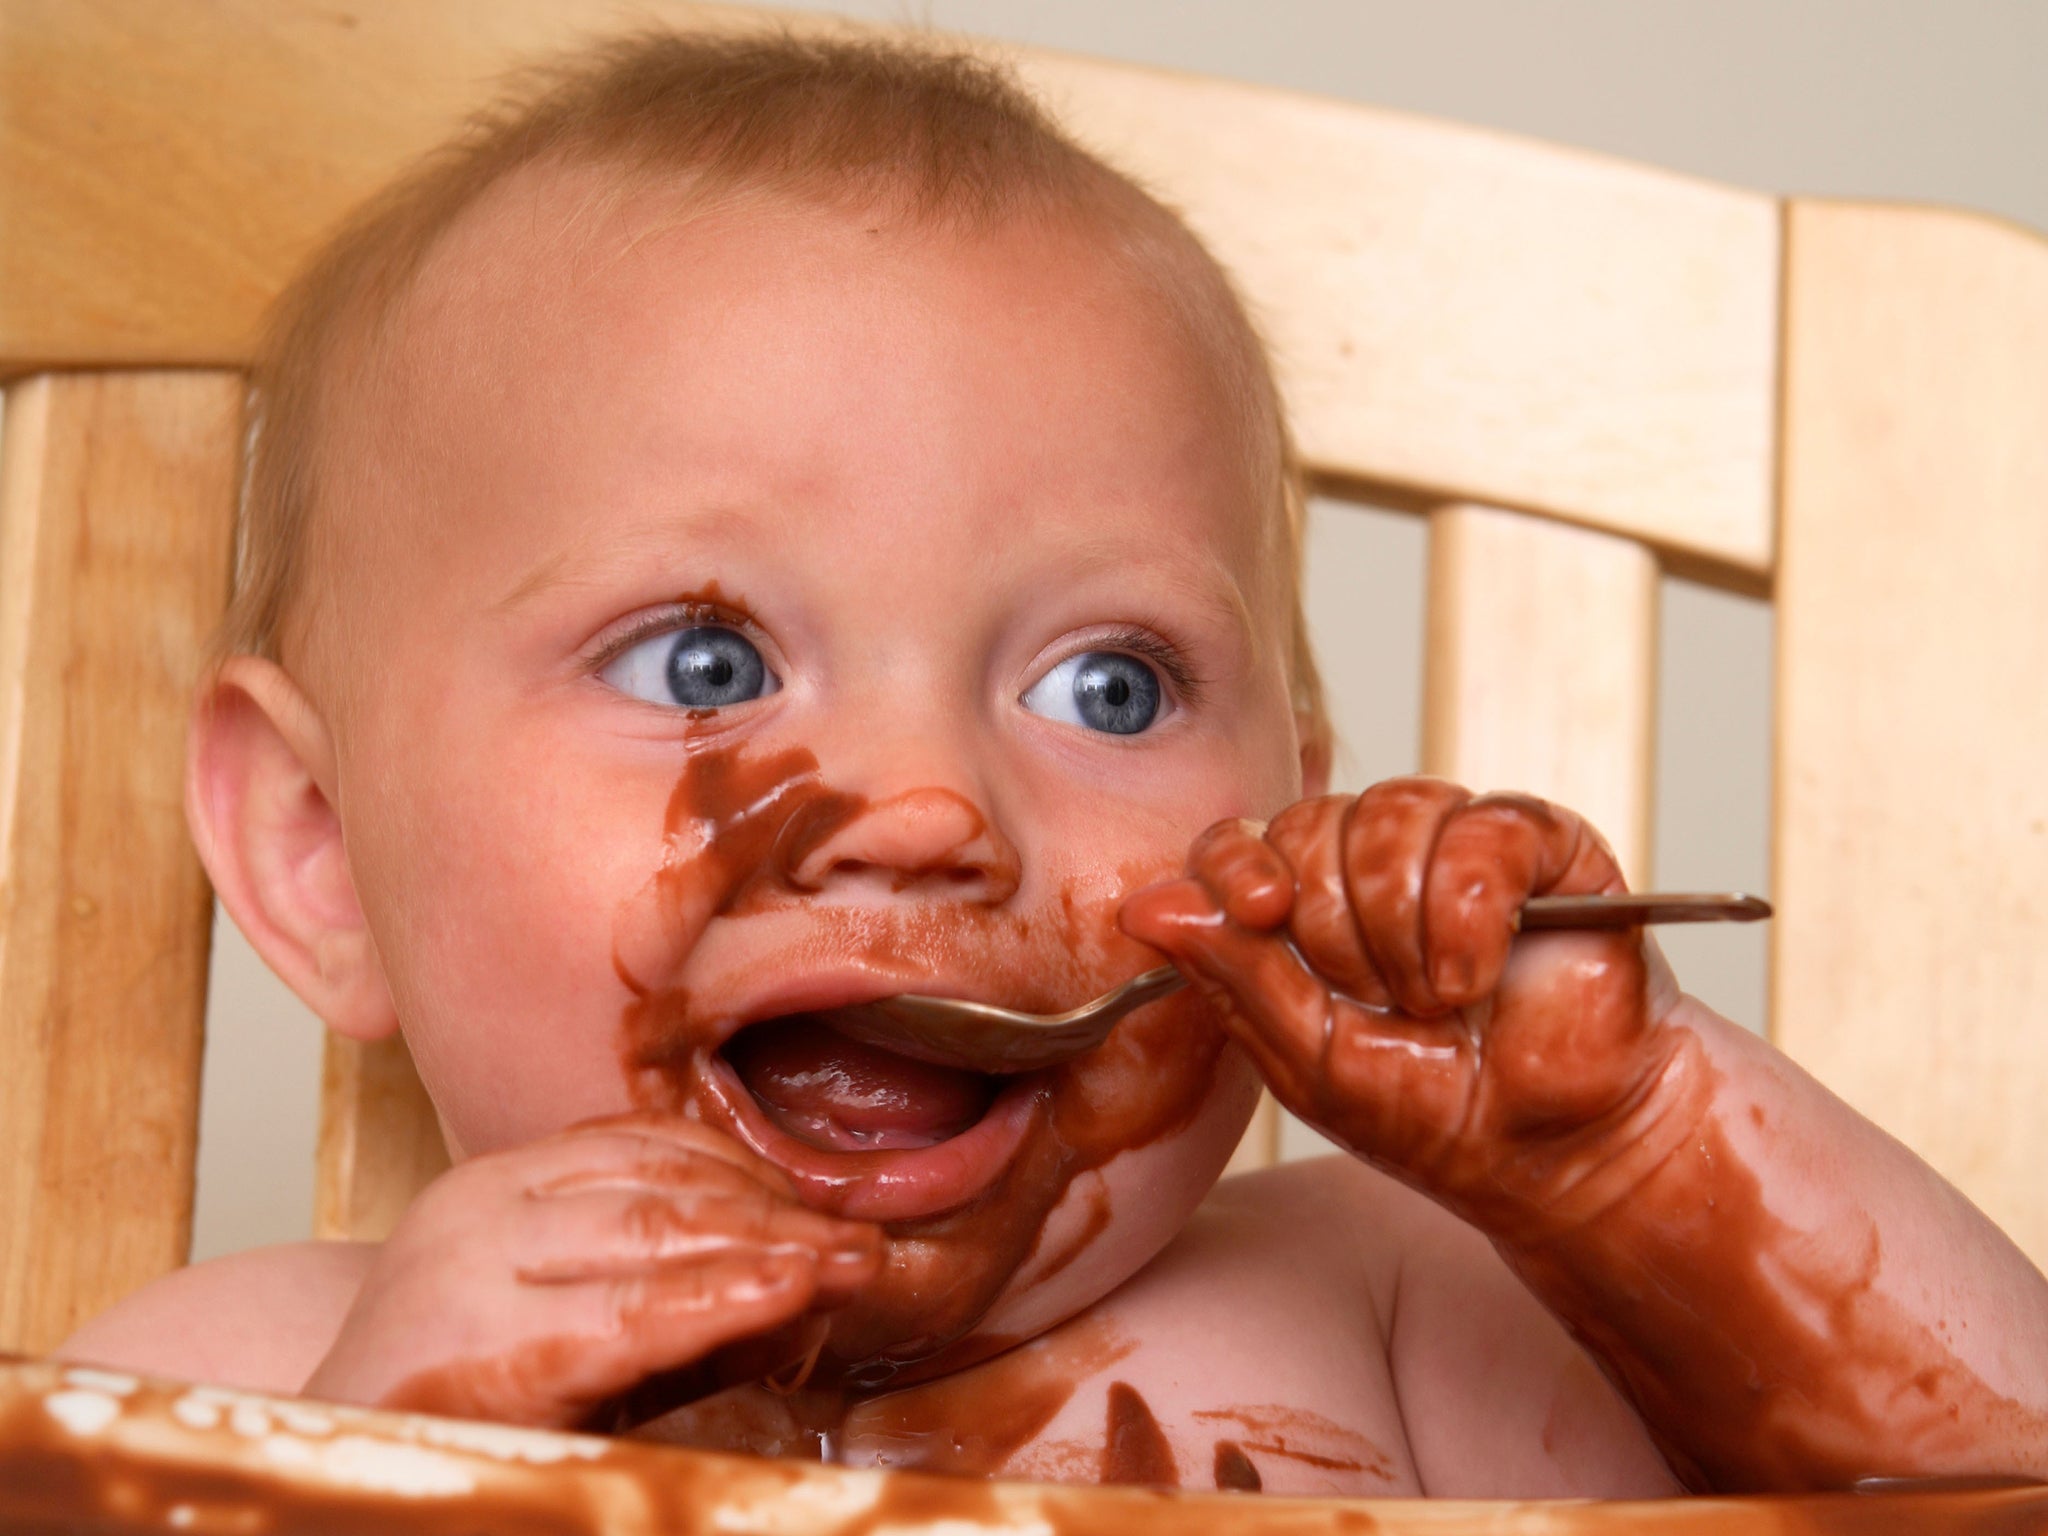 Messy eaters: babies have to learn their table manners
somewhere